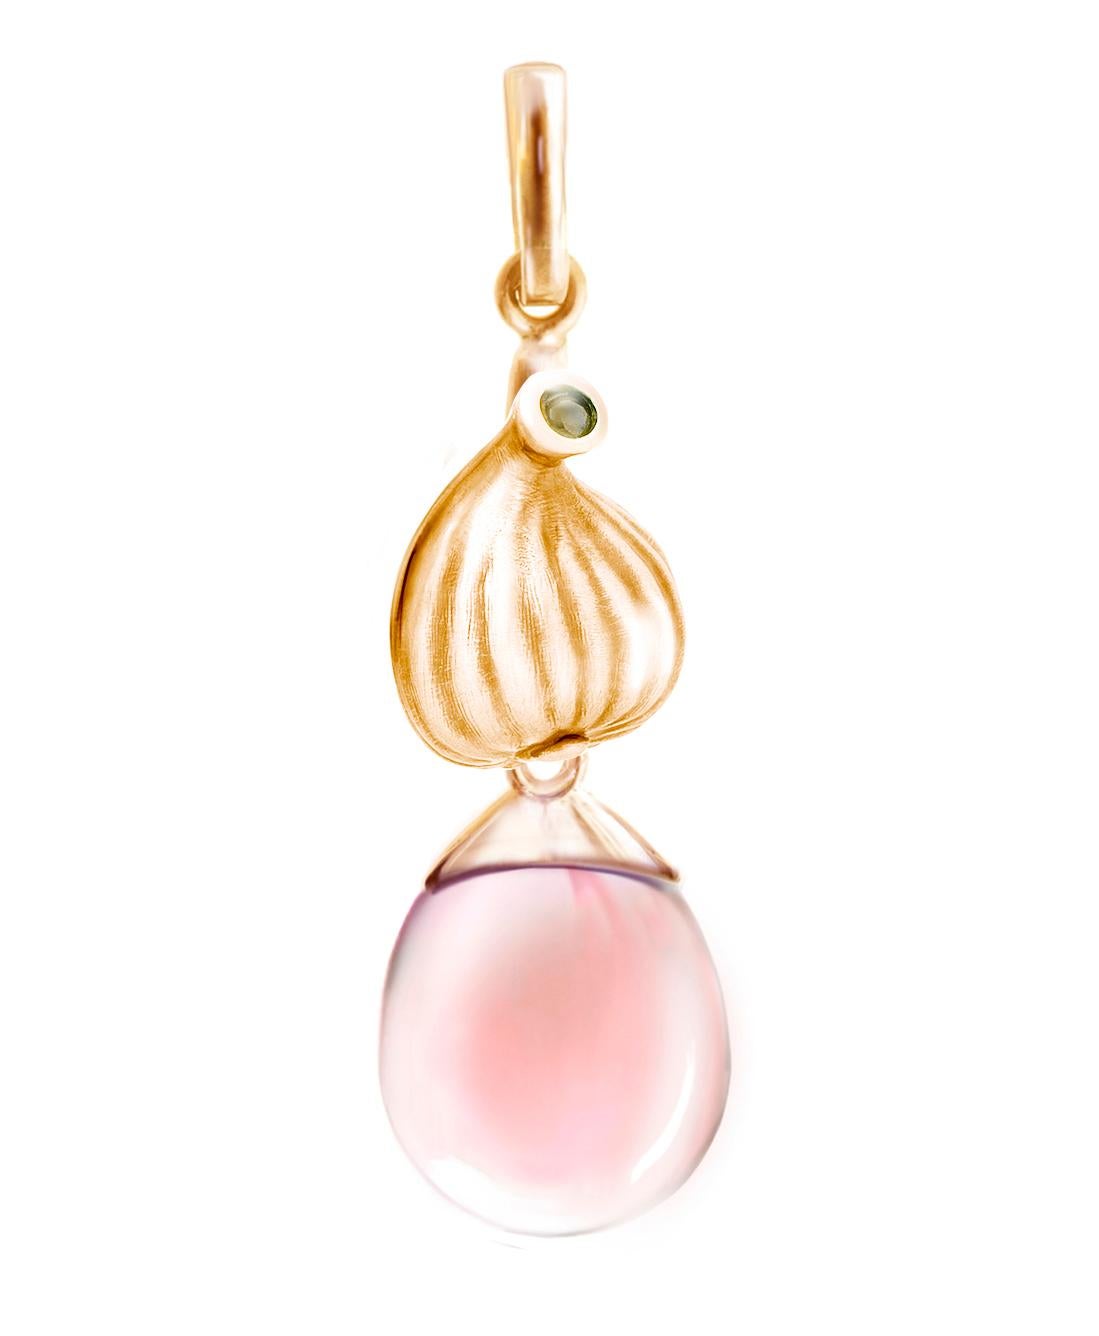 This Fig Garden drop pendant necklace features a cabochon rose quartz set in 18 karat rose gold. The gem is intentionally left open to allow light to pass through, enhancing its beauty. This collection has been featured in Vogue UA.

The idea for